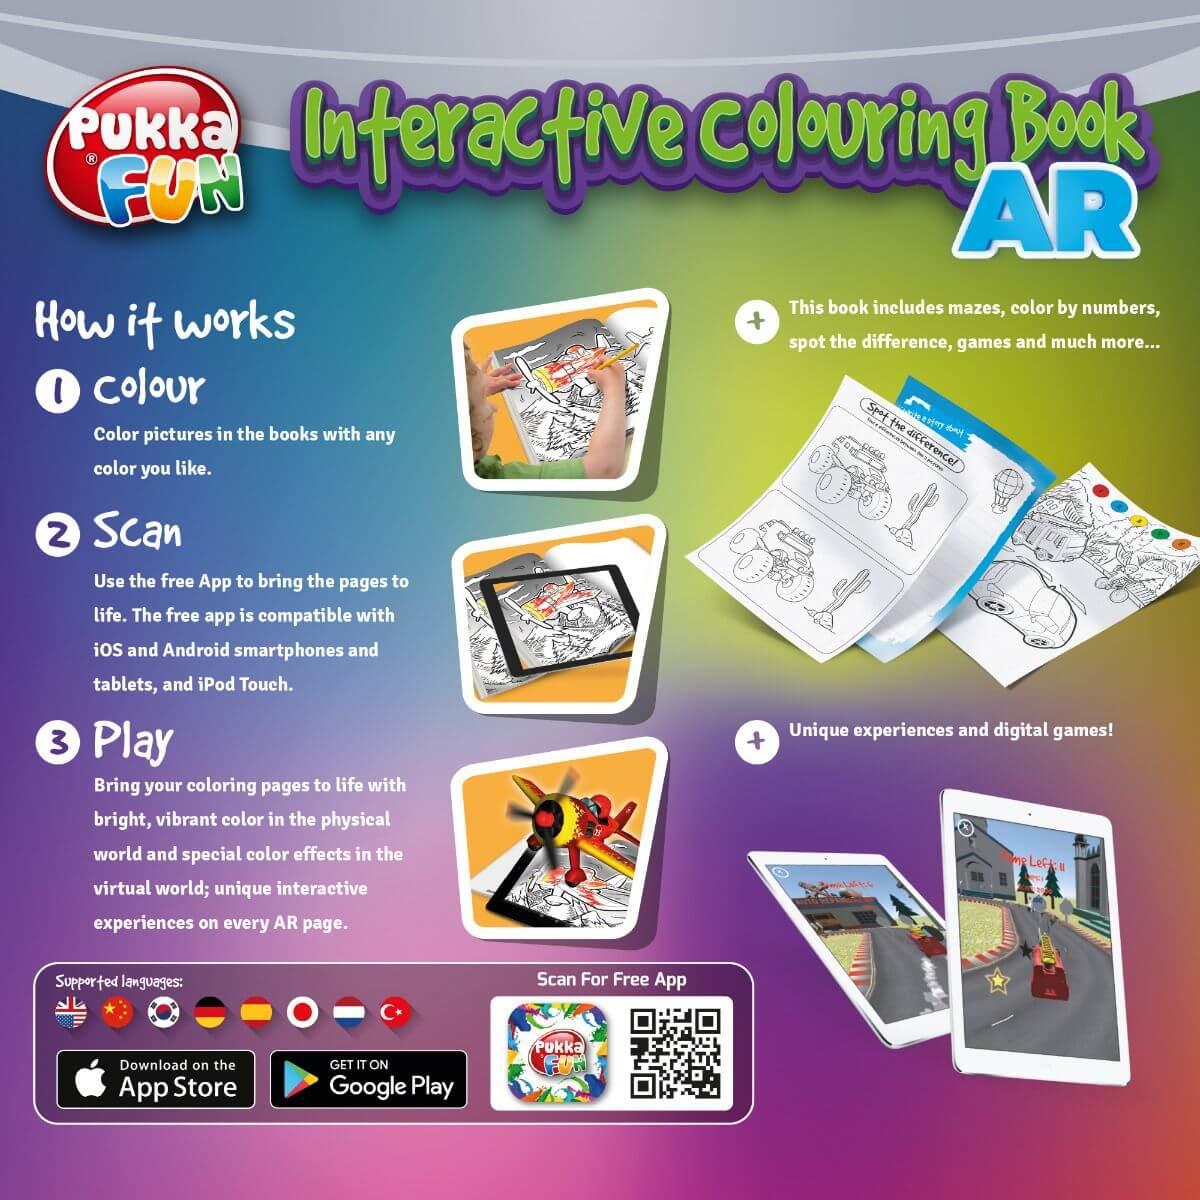 Rear of the colouring pad illustrating how it works with a digital app.